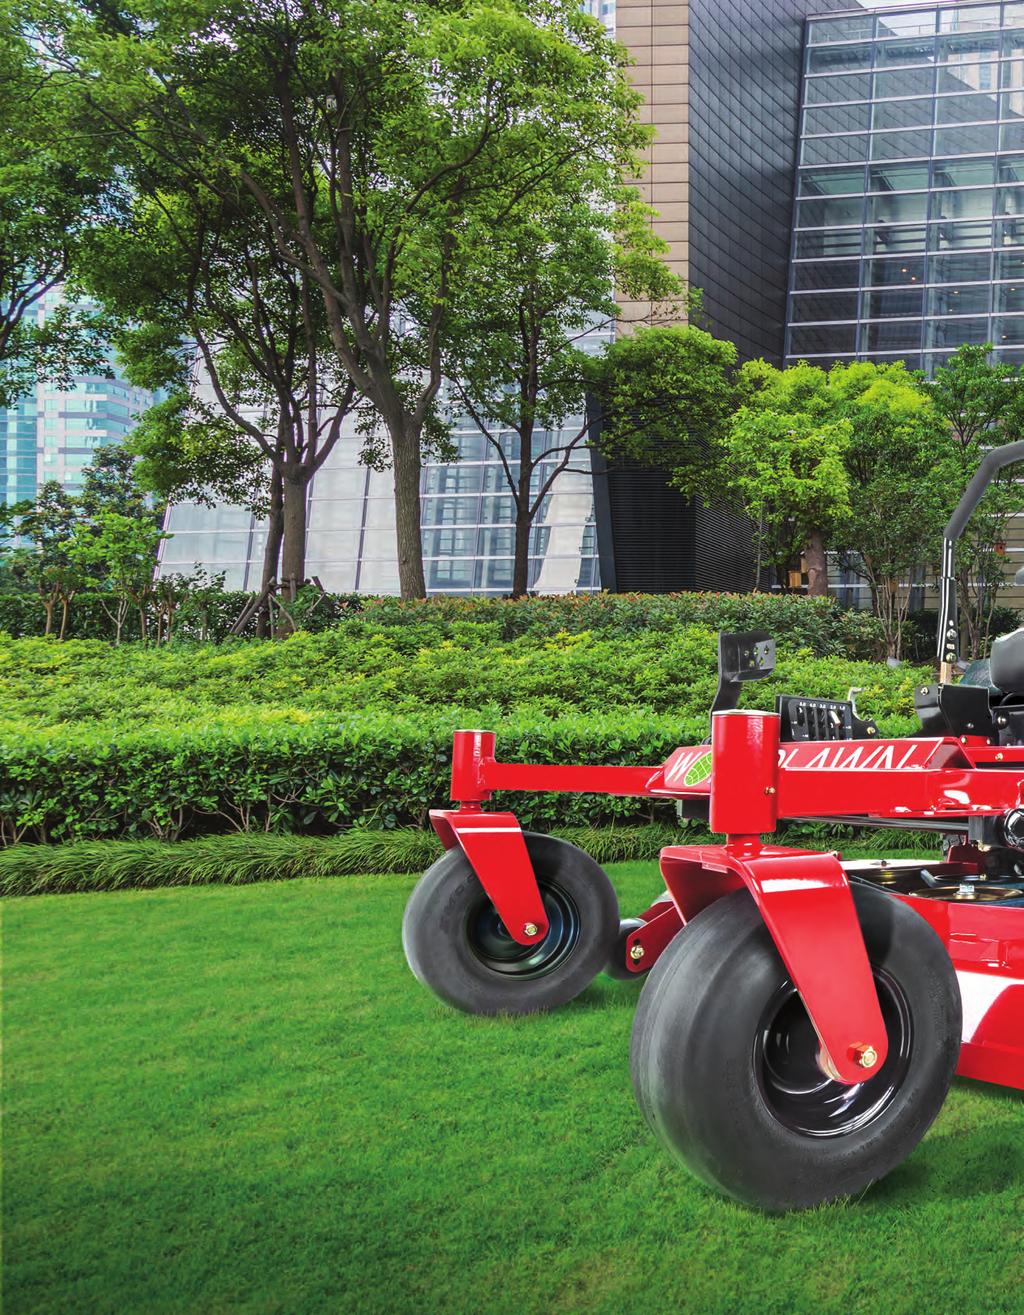 Leveraging global resources, Worldlawn builds outdoor power equipment that you can depend on.